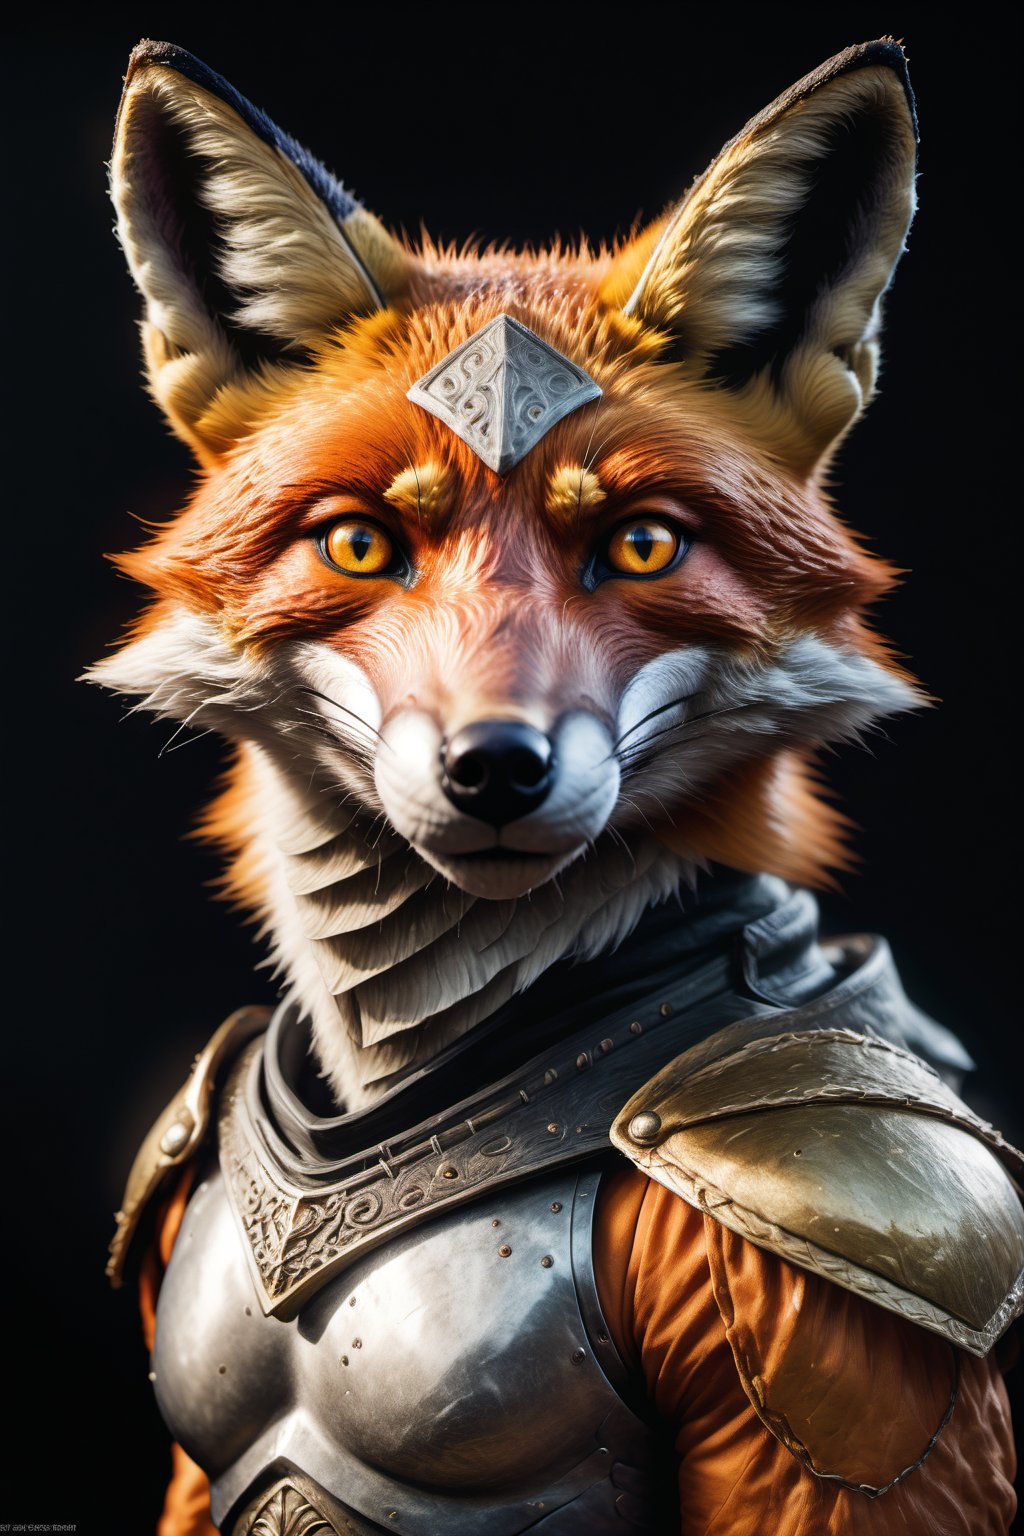 In this breathtakingly detailed masterpiece, a majestic male fox is rendered in high-resolution glory. Standing solo, its upper body is depicted from the side, showcasing its striking features. The fox's fur is a mesmerizing blend of textures and hues, with a subtle sheen that catches the light. Its ears are pointed upwards, alert to potential threats, while its snout is strong and determined. The piercing orange eyes gleam with intelligence, framed by sharp, angular cheekbones. A subtle armor plating adorns its torso, adding an air of mystique to this regal creature. The overall composition is a masterclass in atmospheric lighting, with the subject's fur blending seamlessly into the dark background, creating a sense of depth and mystery.,BugCraft